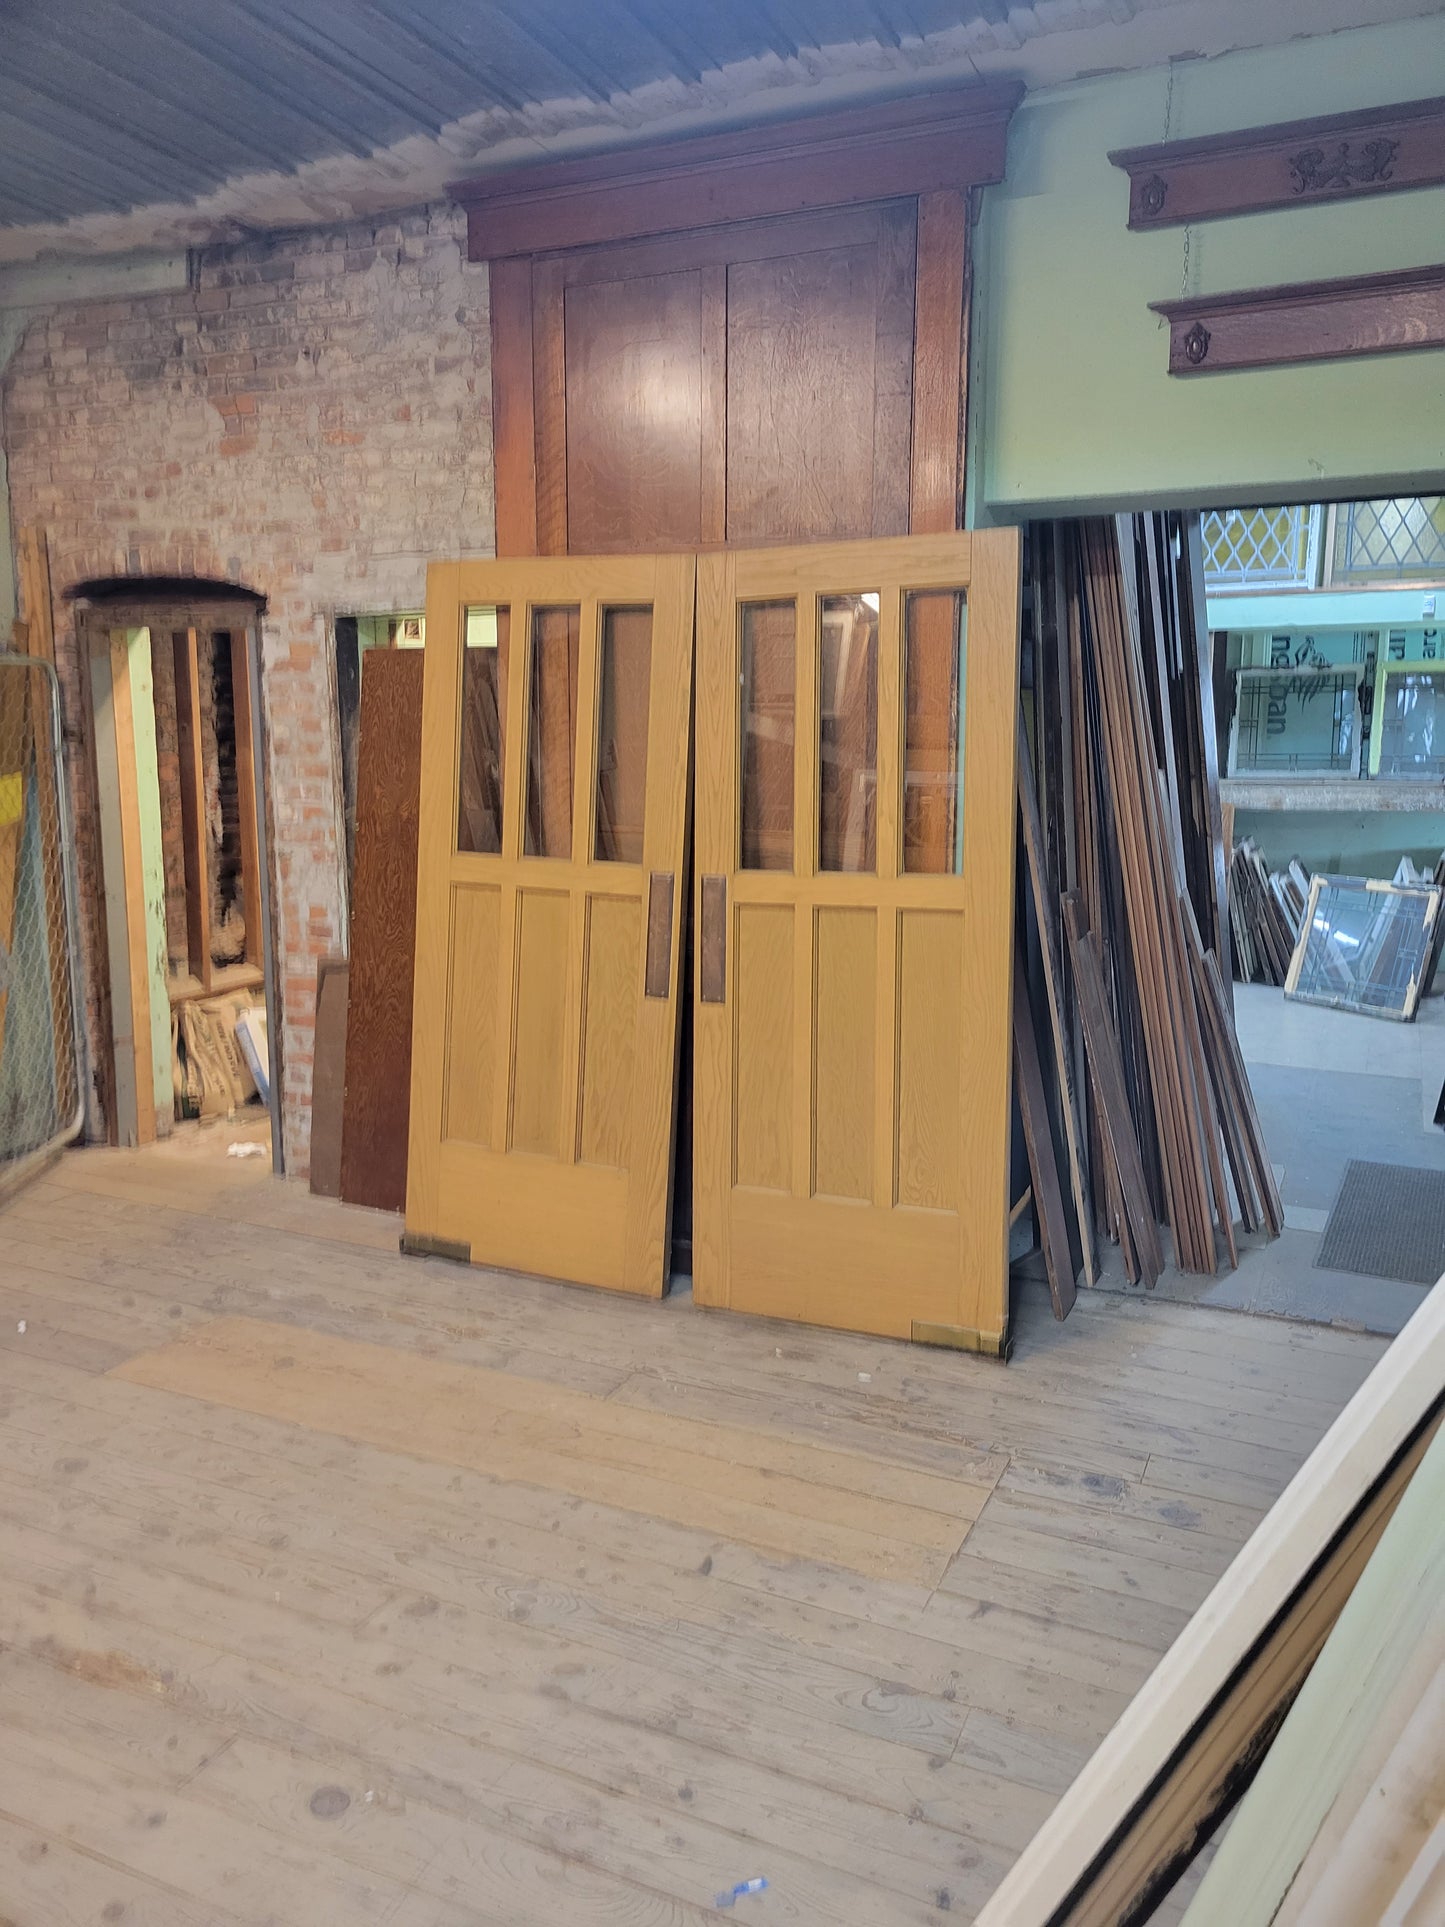 72" Wide Pair of Mid Century Glass Doors from Church, Vintage Double Pivoting Glass Church Doors #1